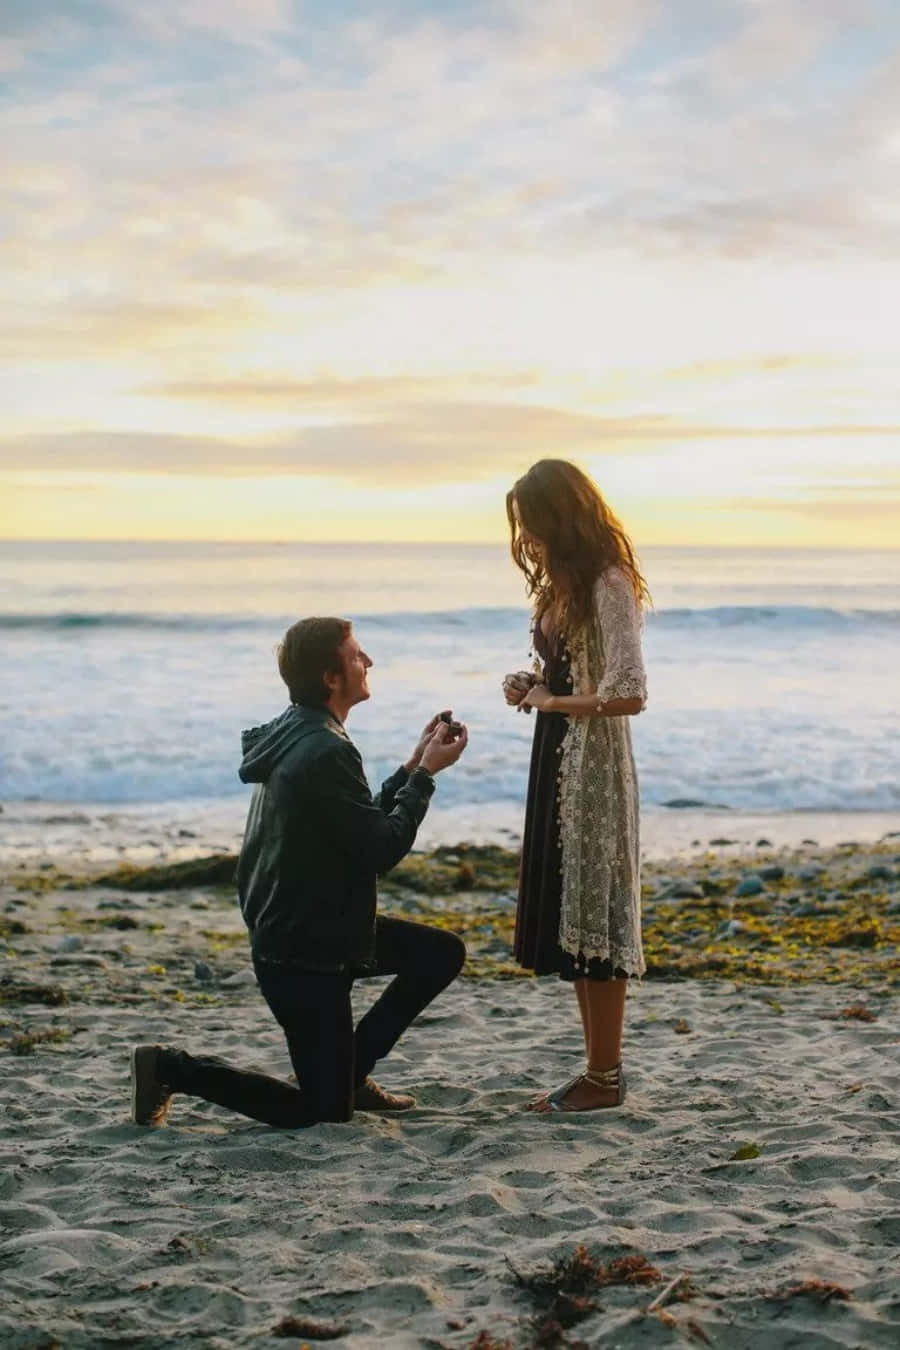 "Love and Romance for a Perfect Proposal"